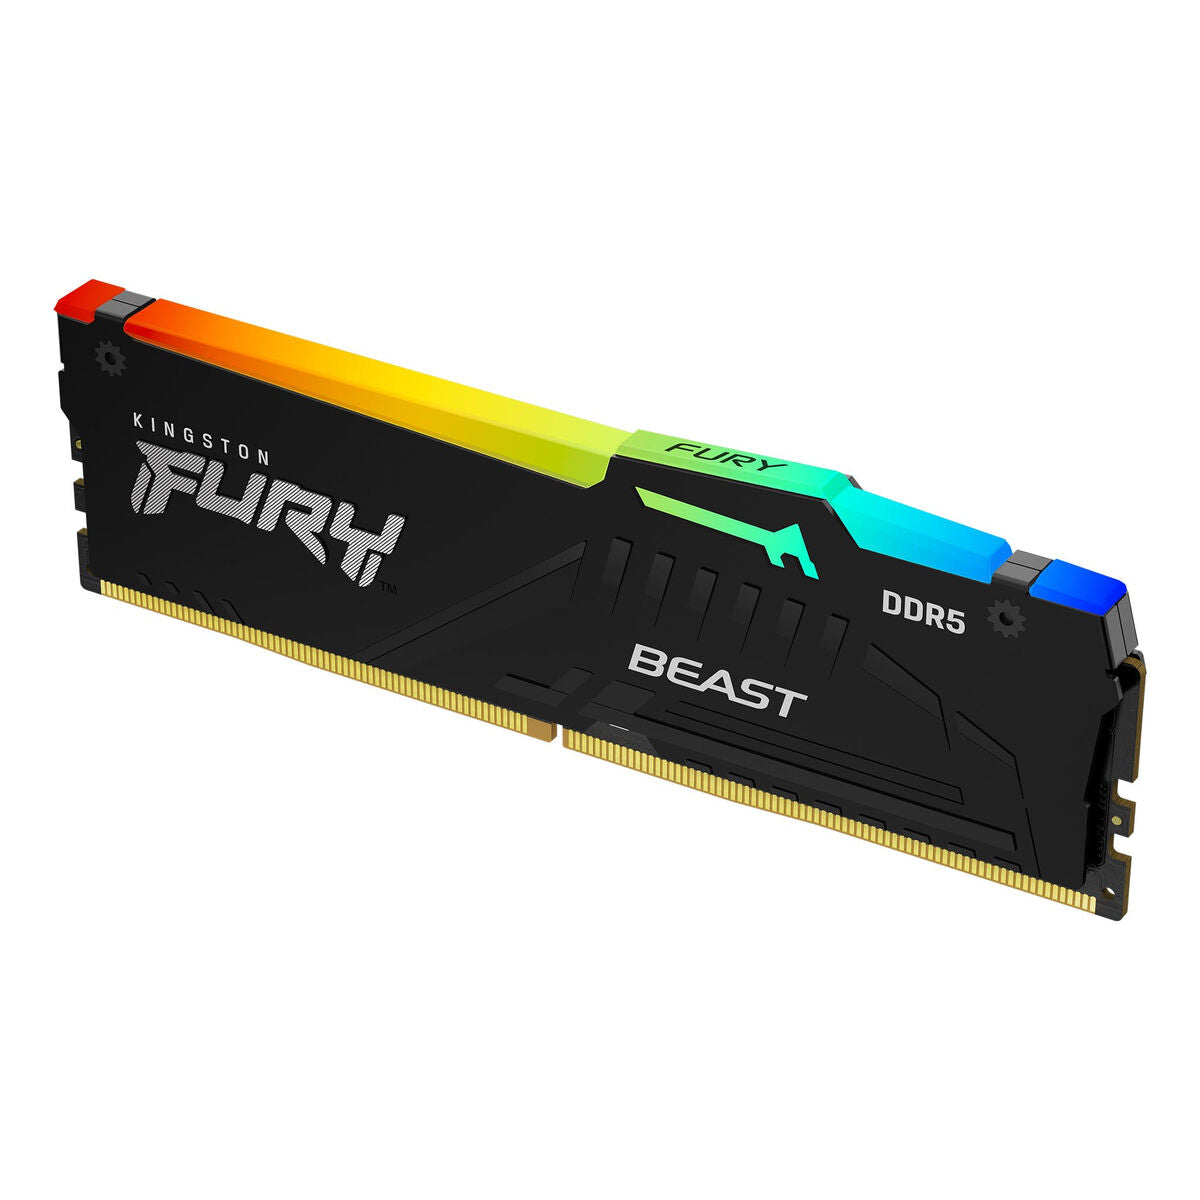 RAM Memory Kingston KF556C40BBA-16 16 GB DDR5 5600 MHz CL40, Kingston, Computing, Components, ram-memory-kingston-kf556c40bba-16-16-gb-ddr5-5600-mhz-cl40, Brand_Kingston, category-reference-2609, category-reference-2803, category-reference-2807, category-reference-t-19685, category-reference-t-19912, category-reference-t-21360, category-reference-t-25658, computers / components, Condition_NEW, Price_50 - 100, Teleworking, RiotNook